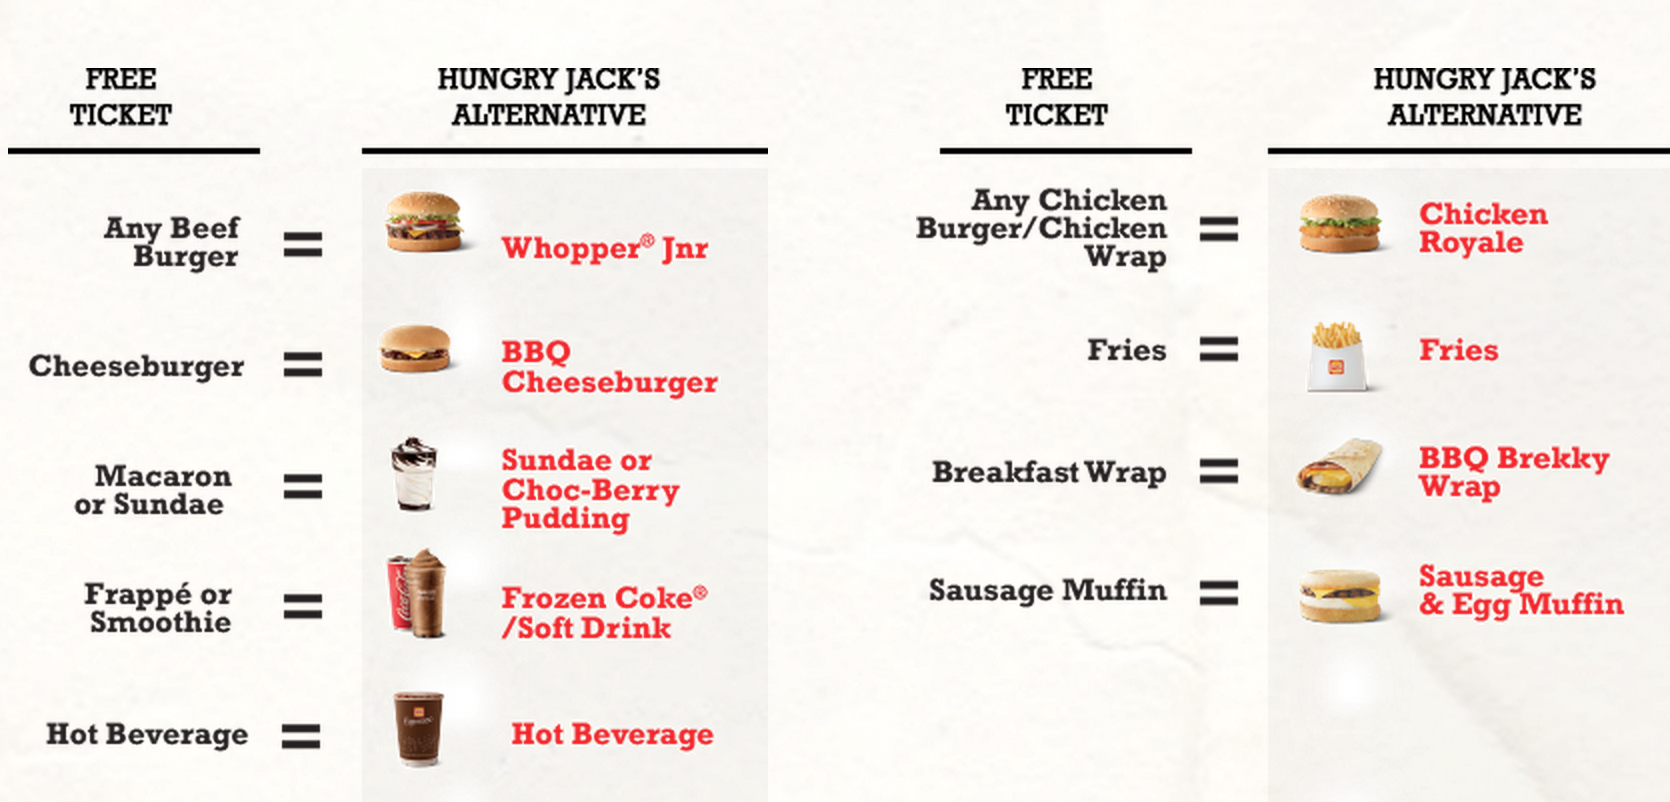 The McDonald's to Hungry Jack conversion chart.